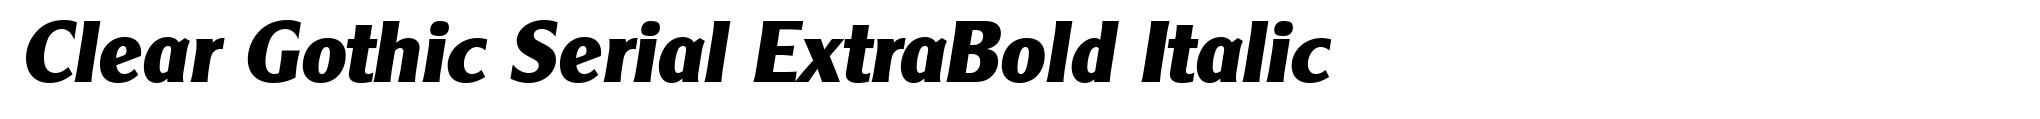 Clear Gothic Serial ExtraBold Italic image